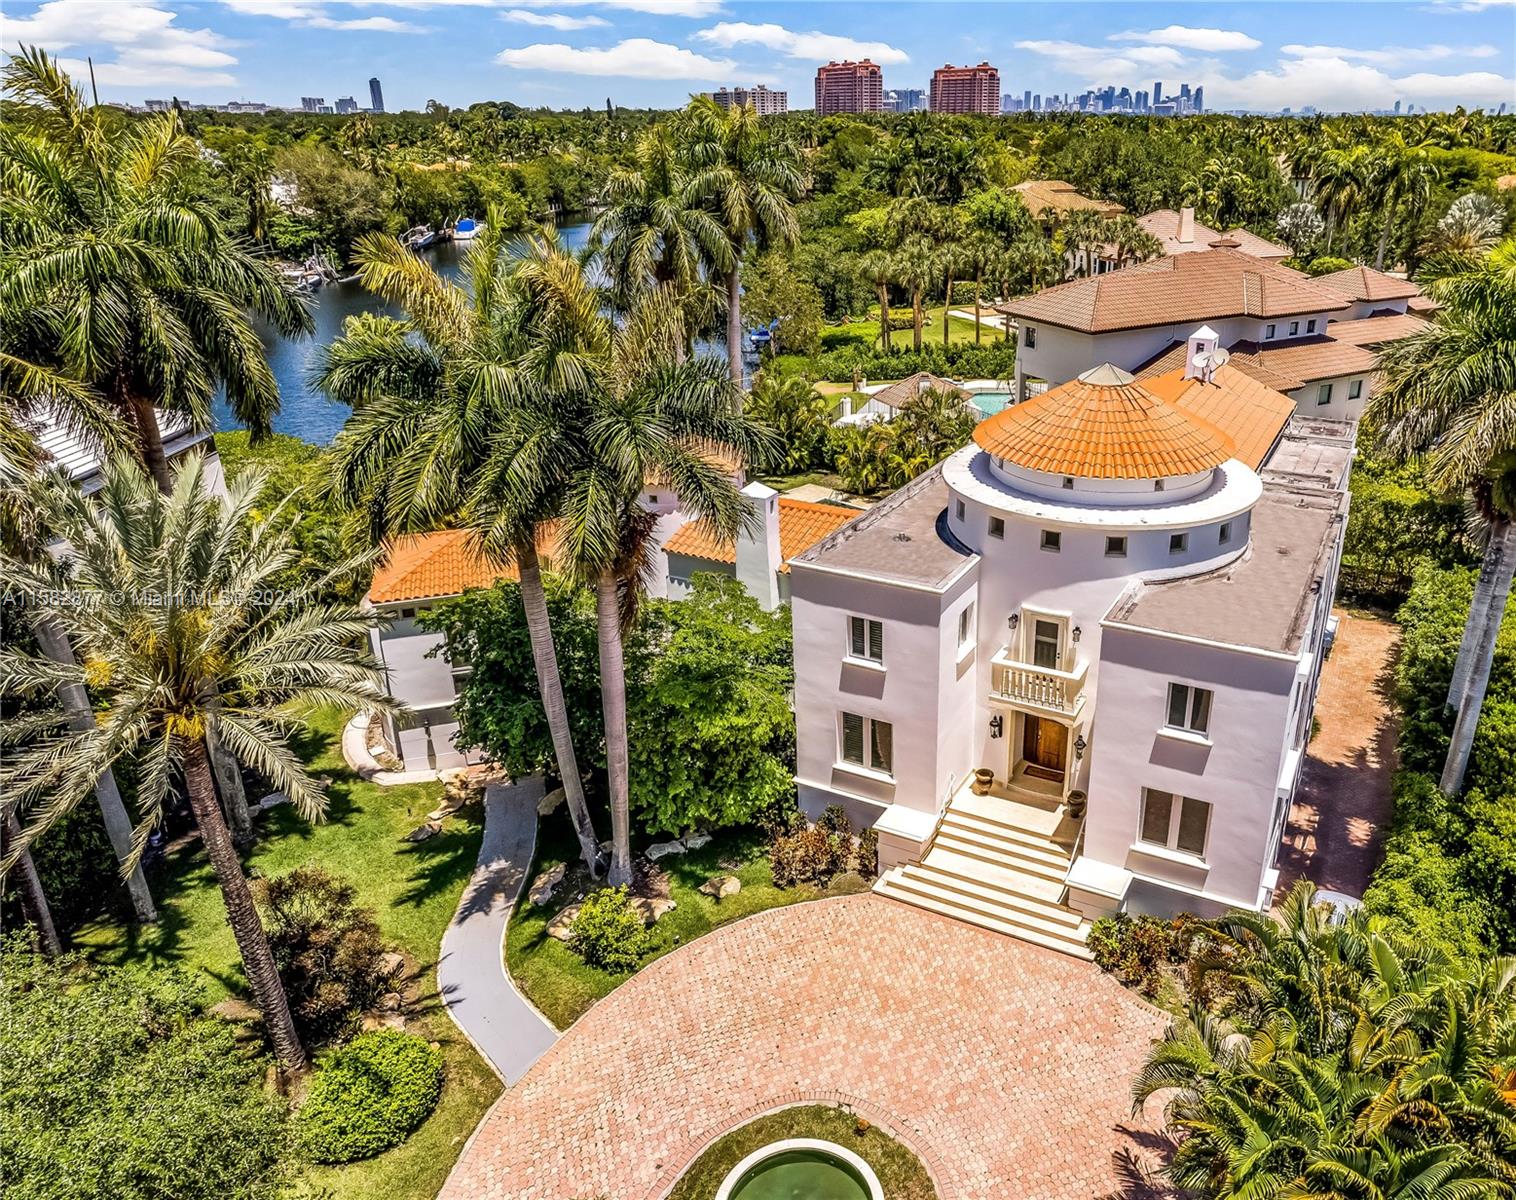 Property for Sale at 431 Costanera Rd Rd, Coral Gables, Broward County, Florida - Bedrooms: 7 
Bathrooms: 8  - $12,500,000